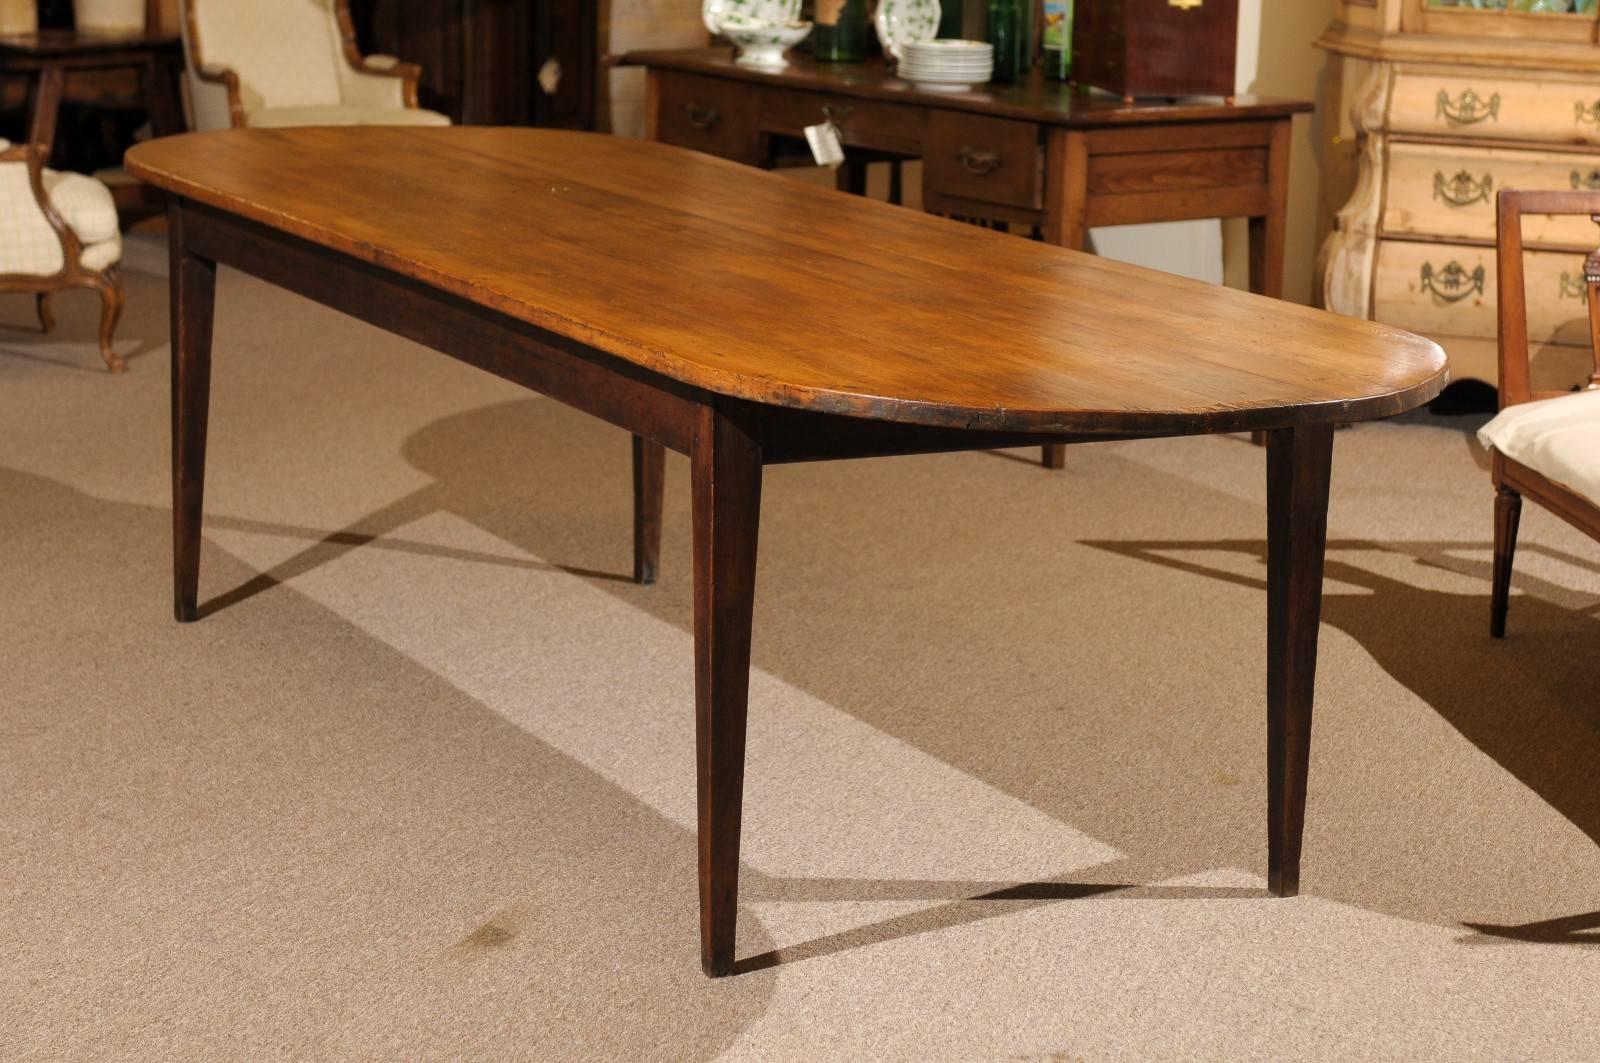 19th century long pine and oak oval farm table, circa 1860.
This is a great table! The racetrack shape gives you the overhang you need at each end to sit comfortably. The pine top is gorgeous in the honey tones and patina that you would love. The